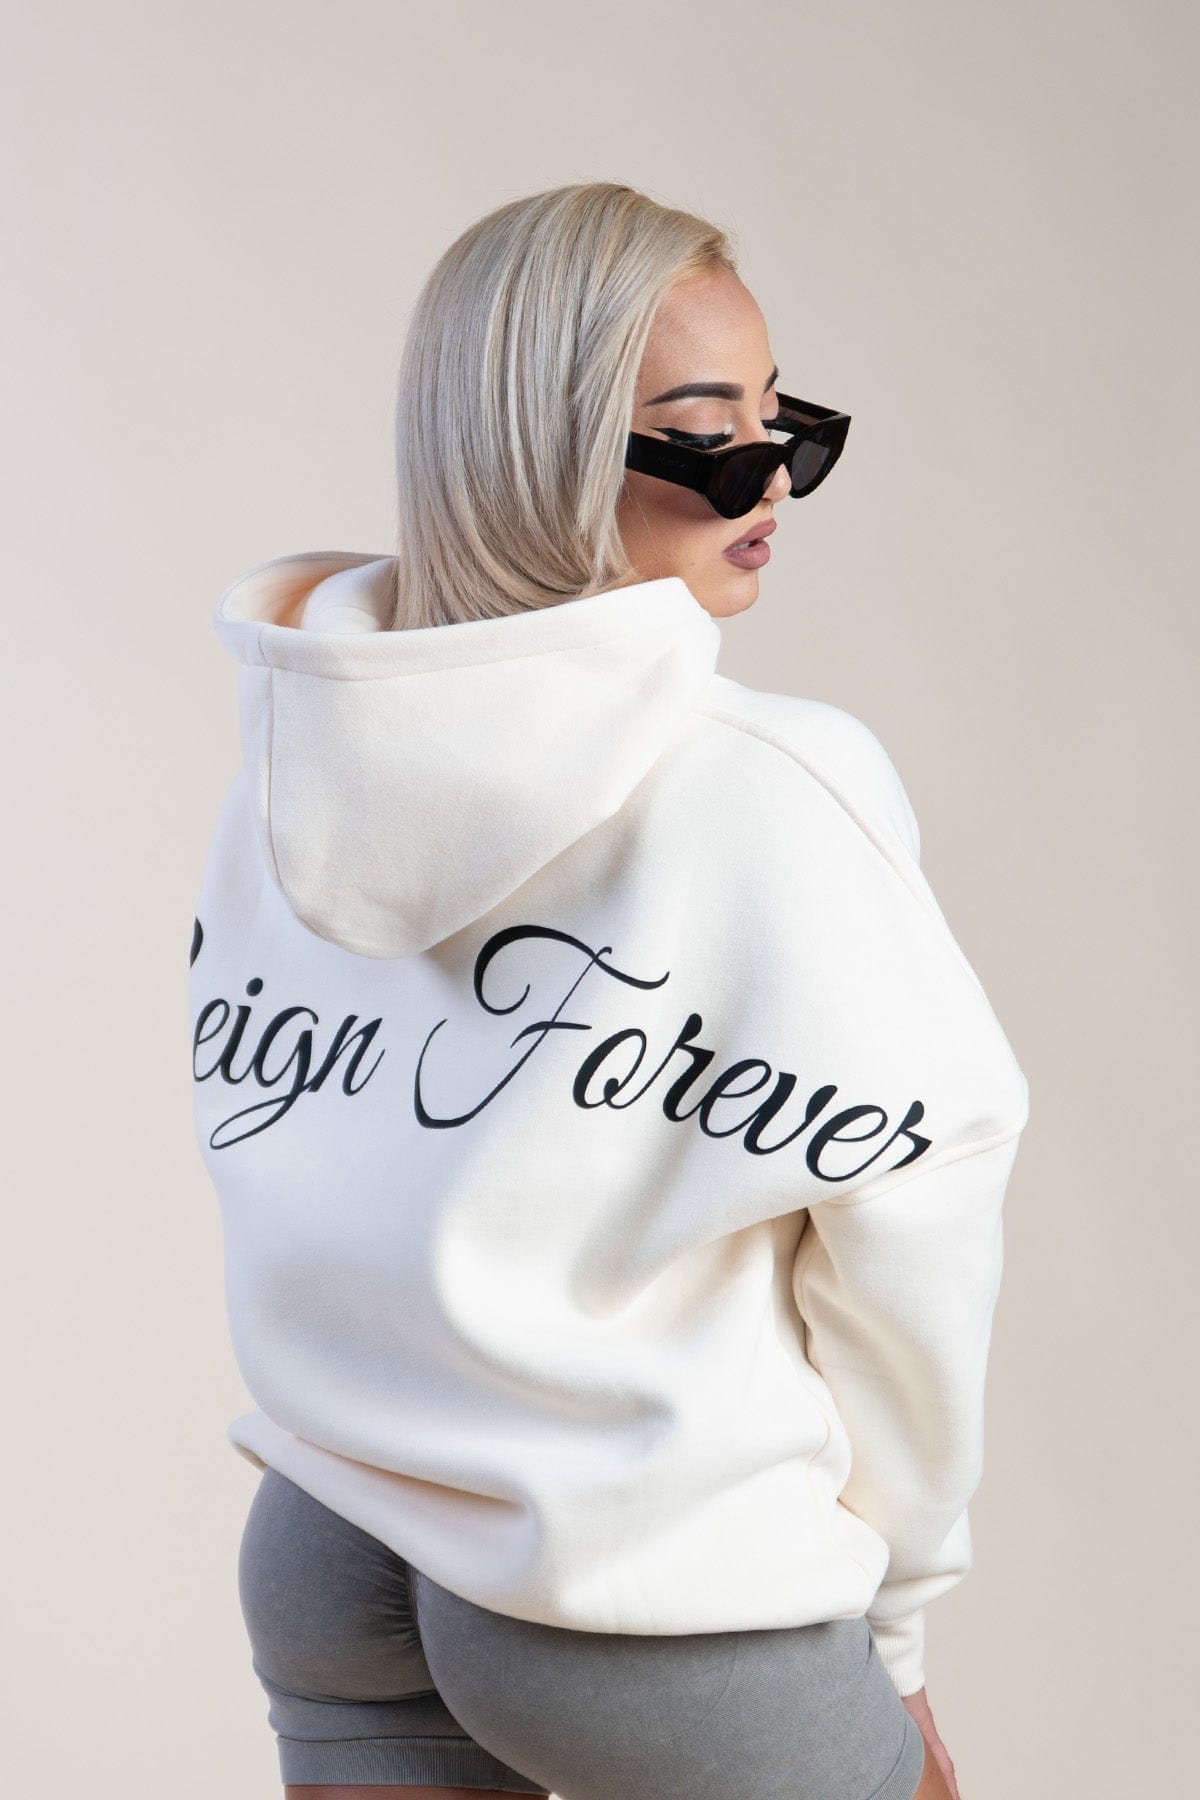 Reign Forever Heavyweight Hoodie